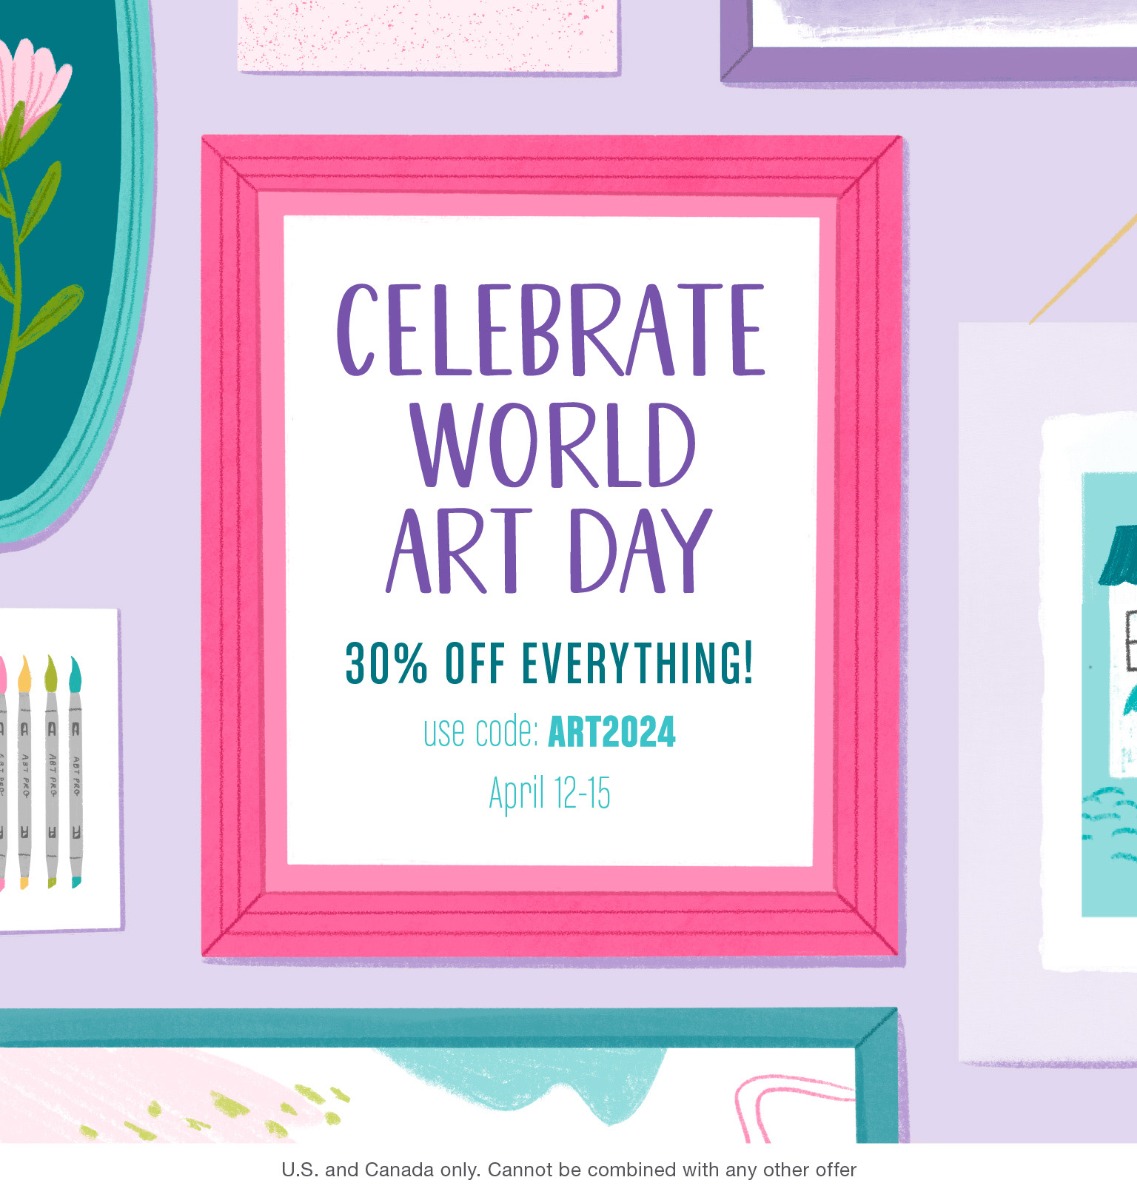 Celebrate World Art Day with 30% off all products. Use code ART2024 now through April 15th at checkout. Cannot be combined with any other offer. United States and Canada only.